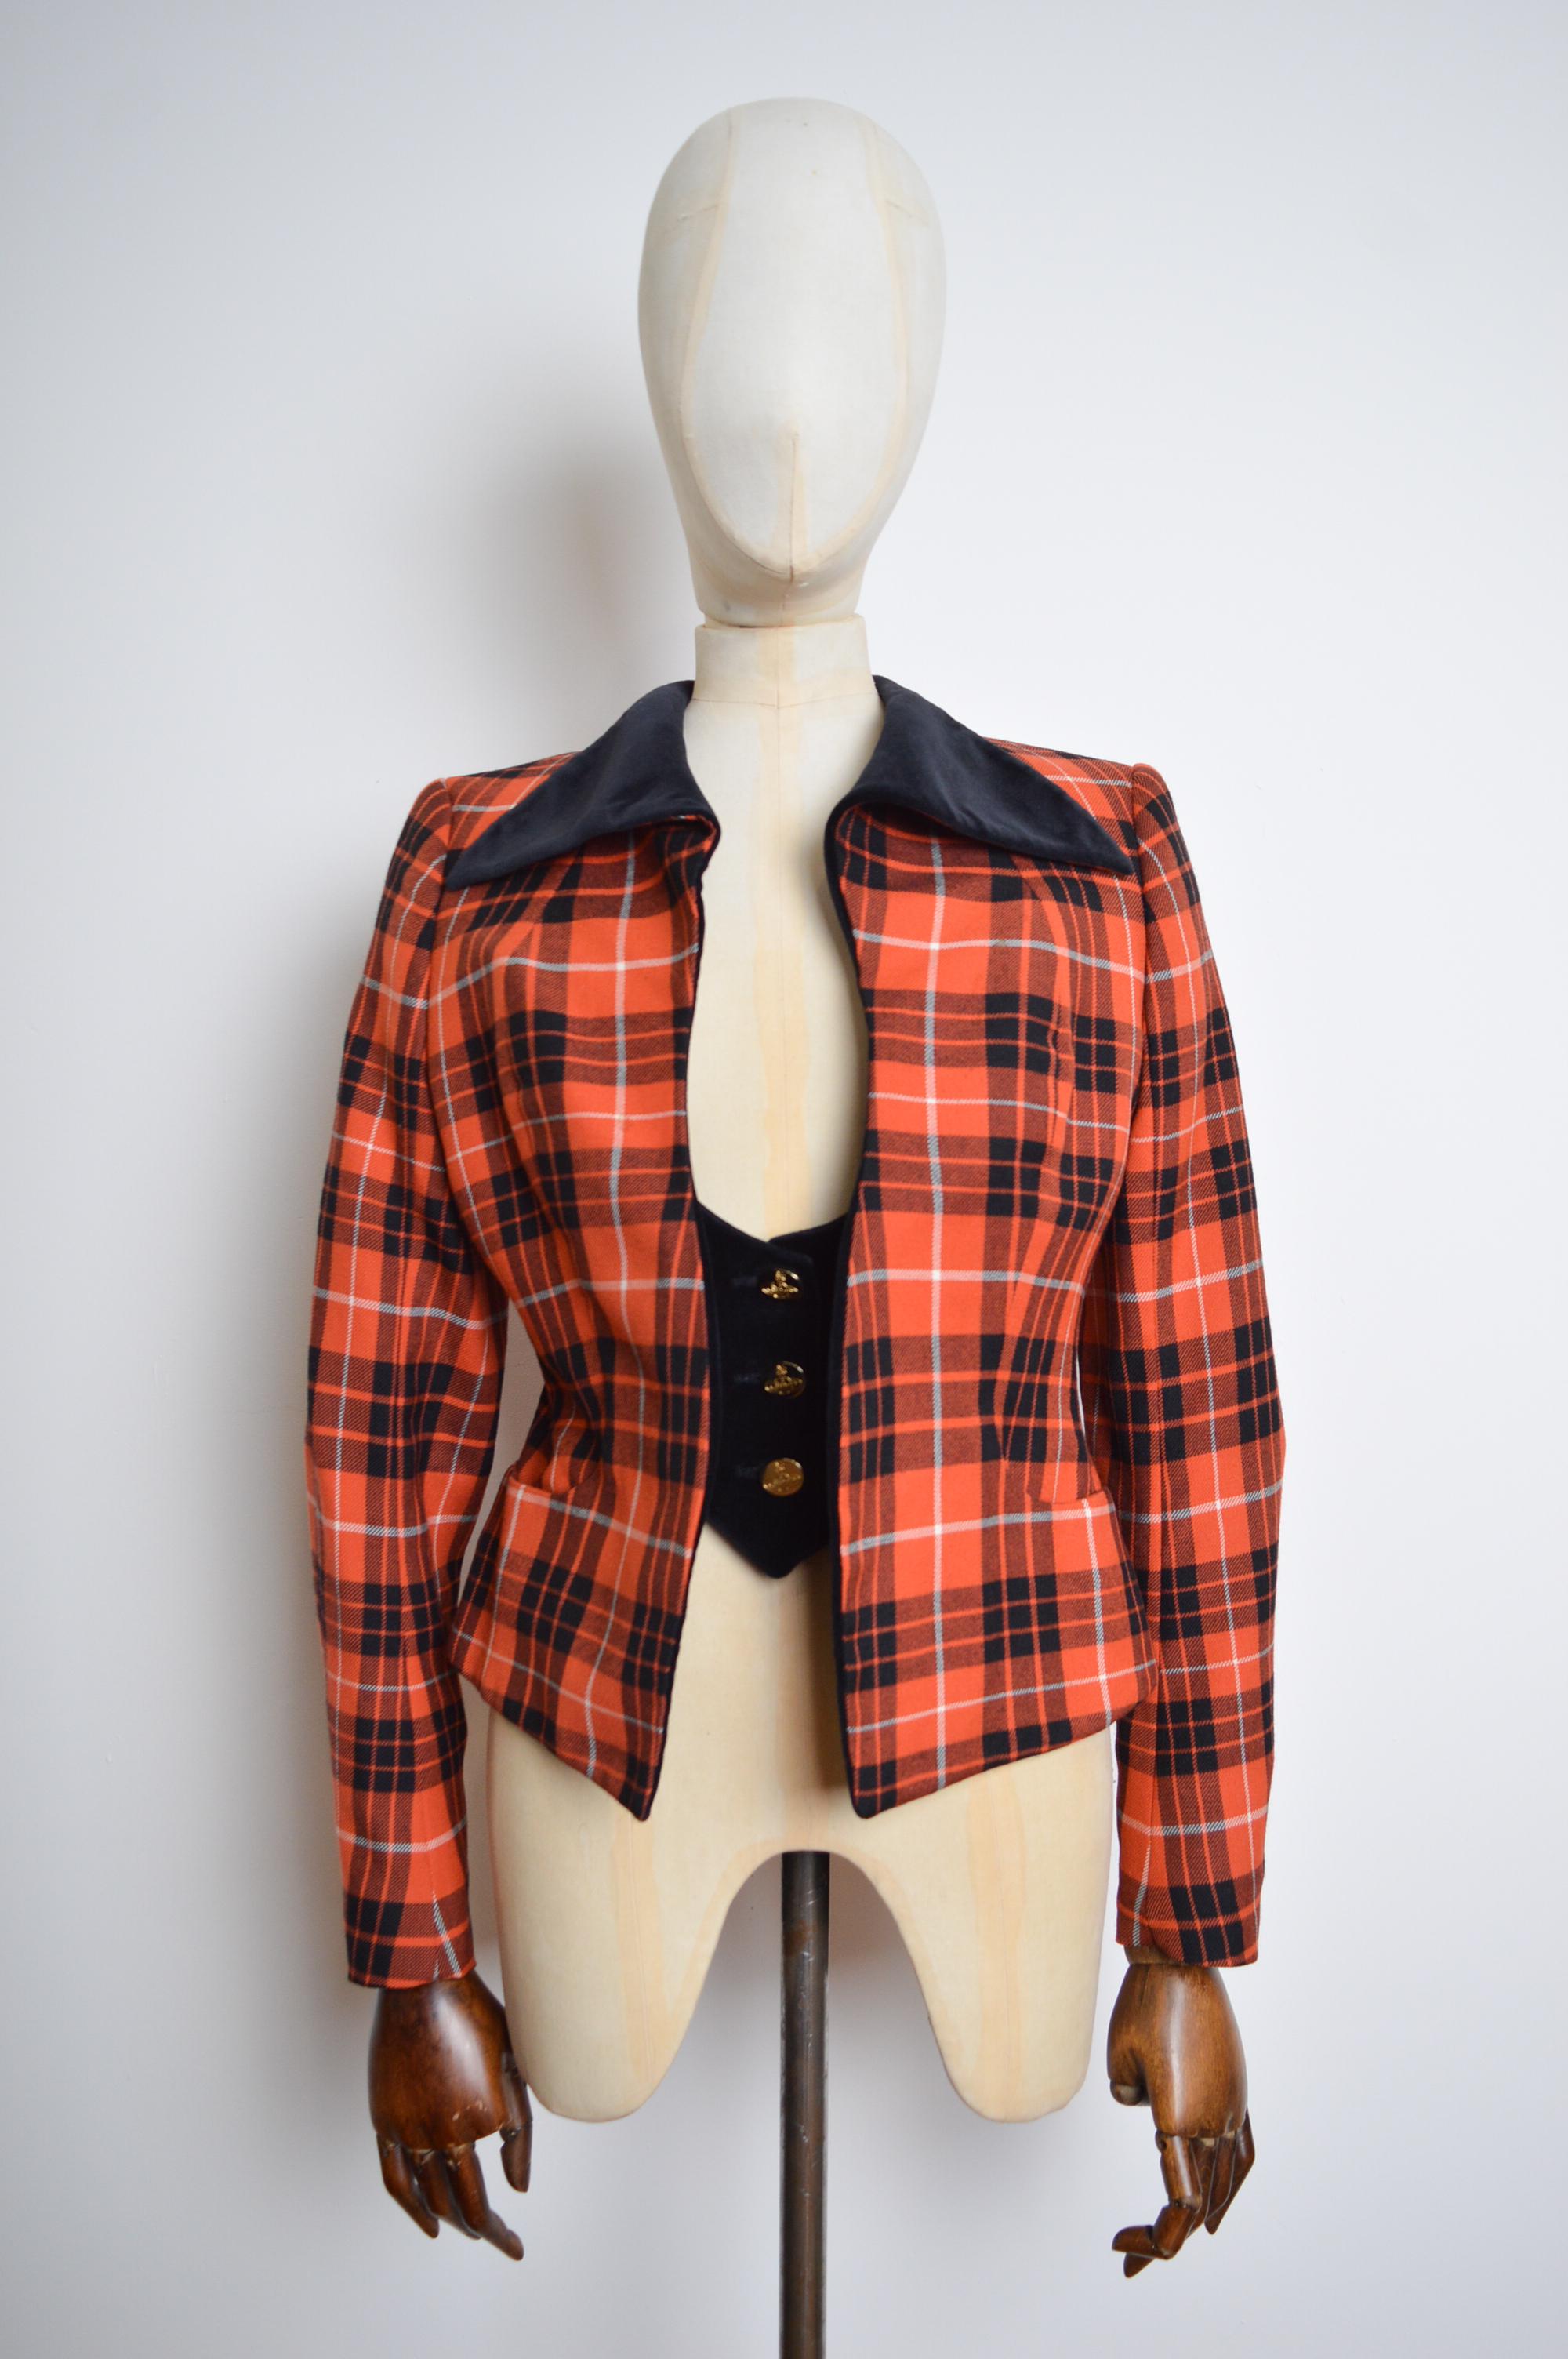 Superb Vintage Vivienne Westwood Runway 'Gold Label' Couture Suit.
Reference 'The Glasgow Show' 1999, Scottish Exhibition Conference Center. 

100% WOOL (Made in SCOTLAND)

The Suit comprises a beautifully Tailored Jacket with a built in figure